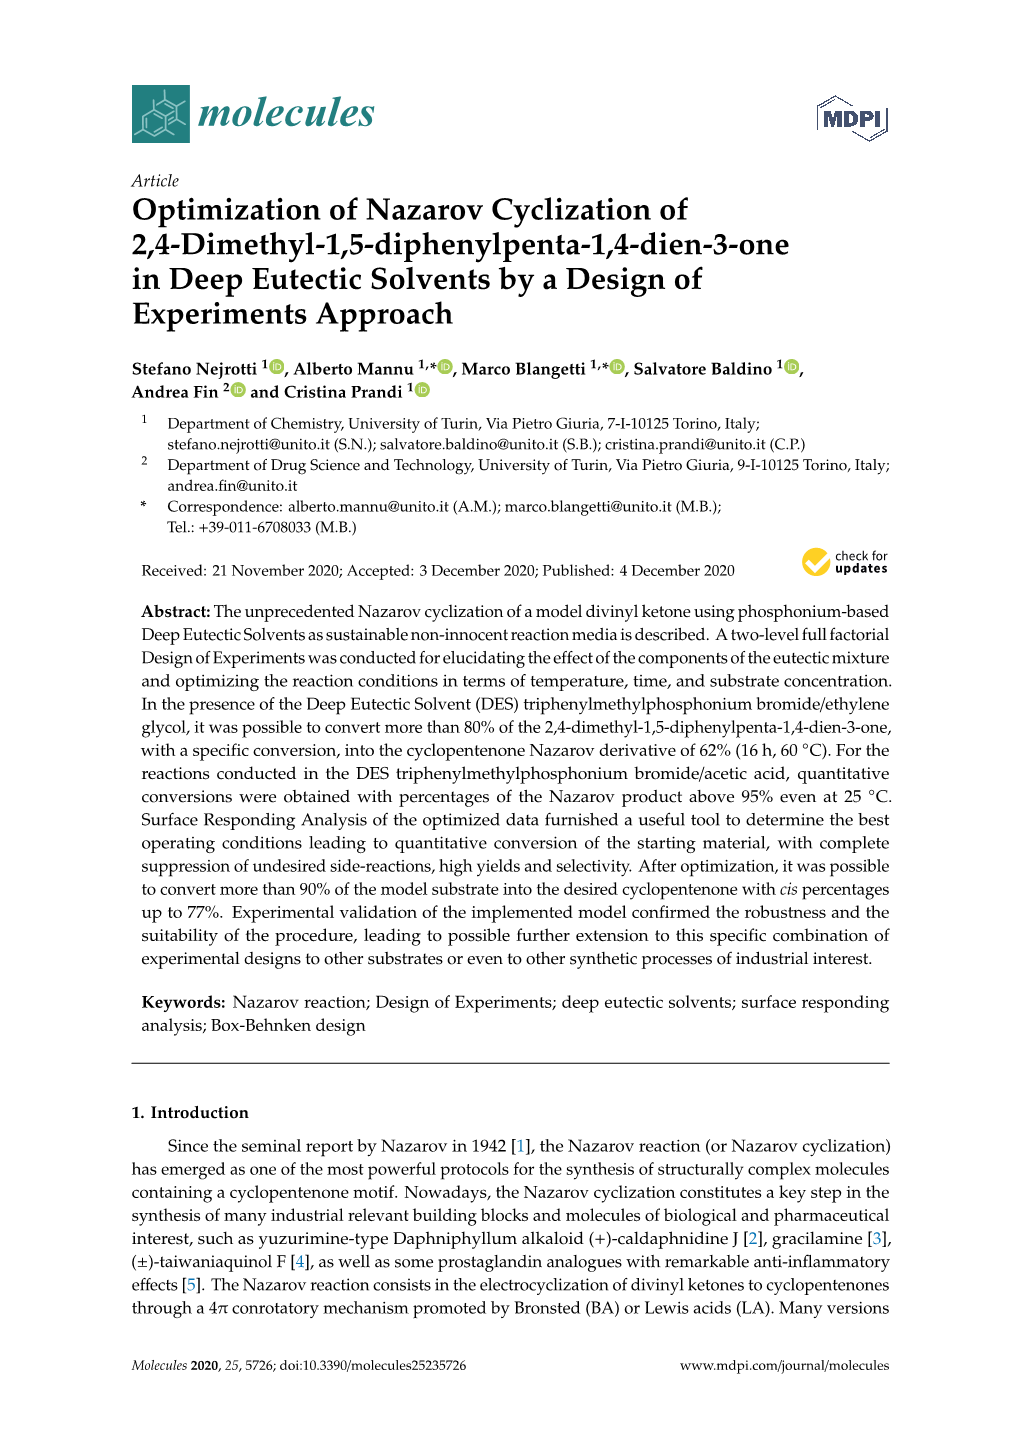 Optimization of Nazarov Cyclization of 2,4-Dimethyl-1,5-Diphenylpenta-1,4-Dien-3-One in Deep Eutectic Solvents by a Design of Experiments Approach